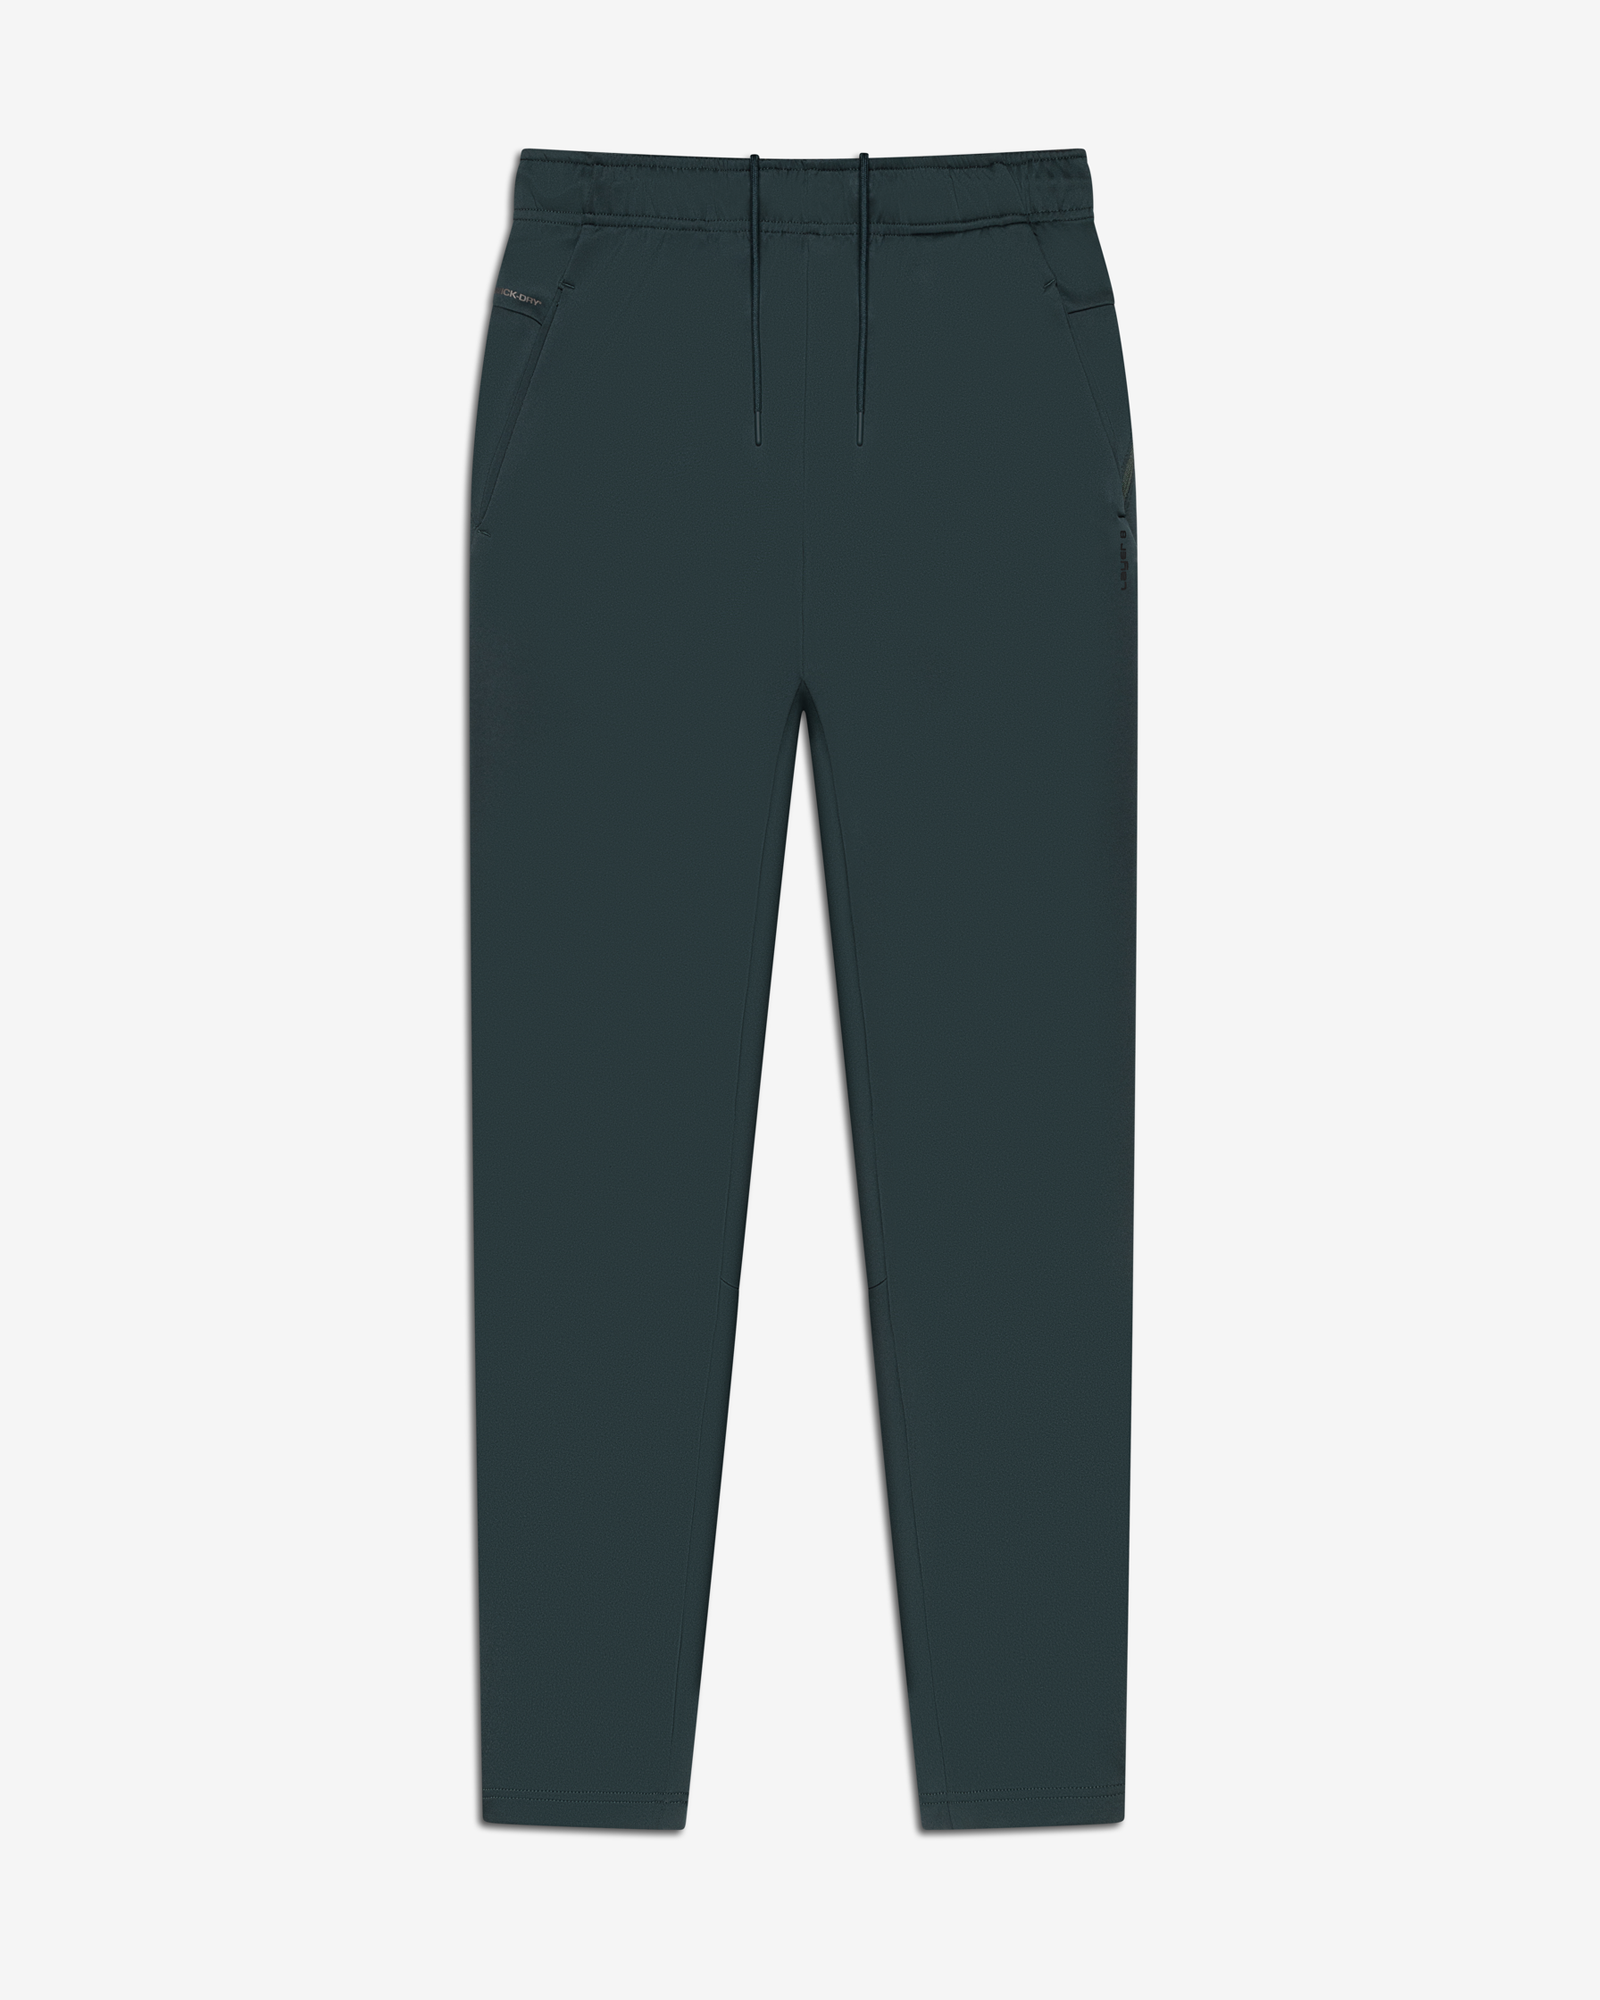 5 Dark Color Pants For (We Chose Colors (Mystery Deal))